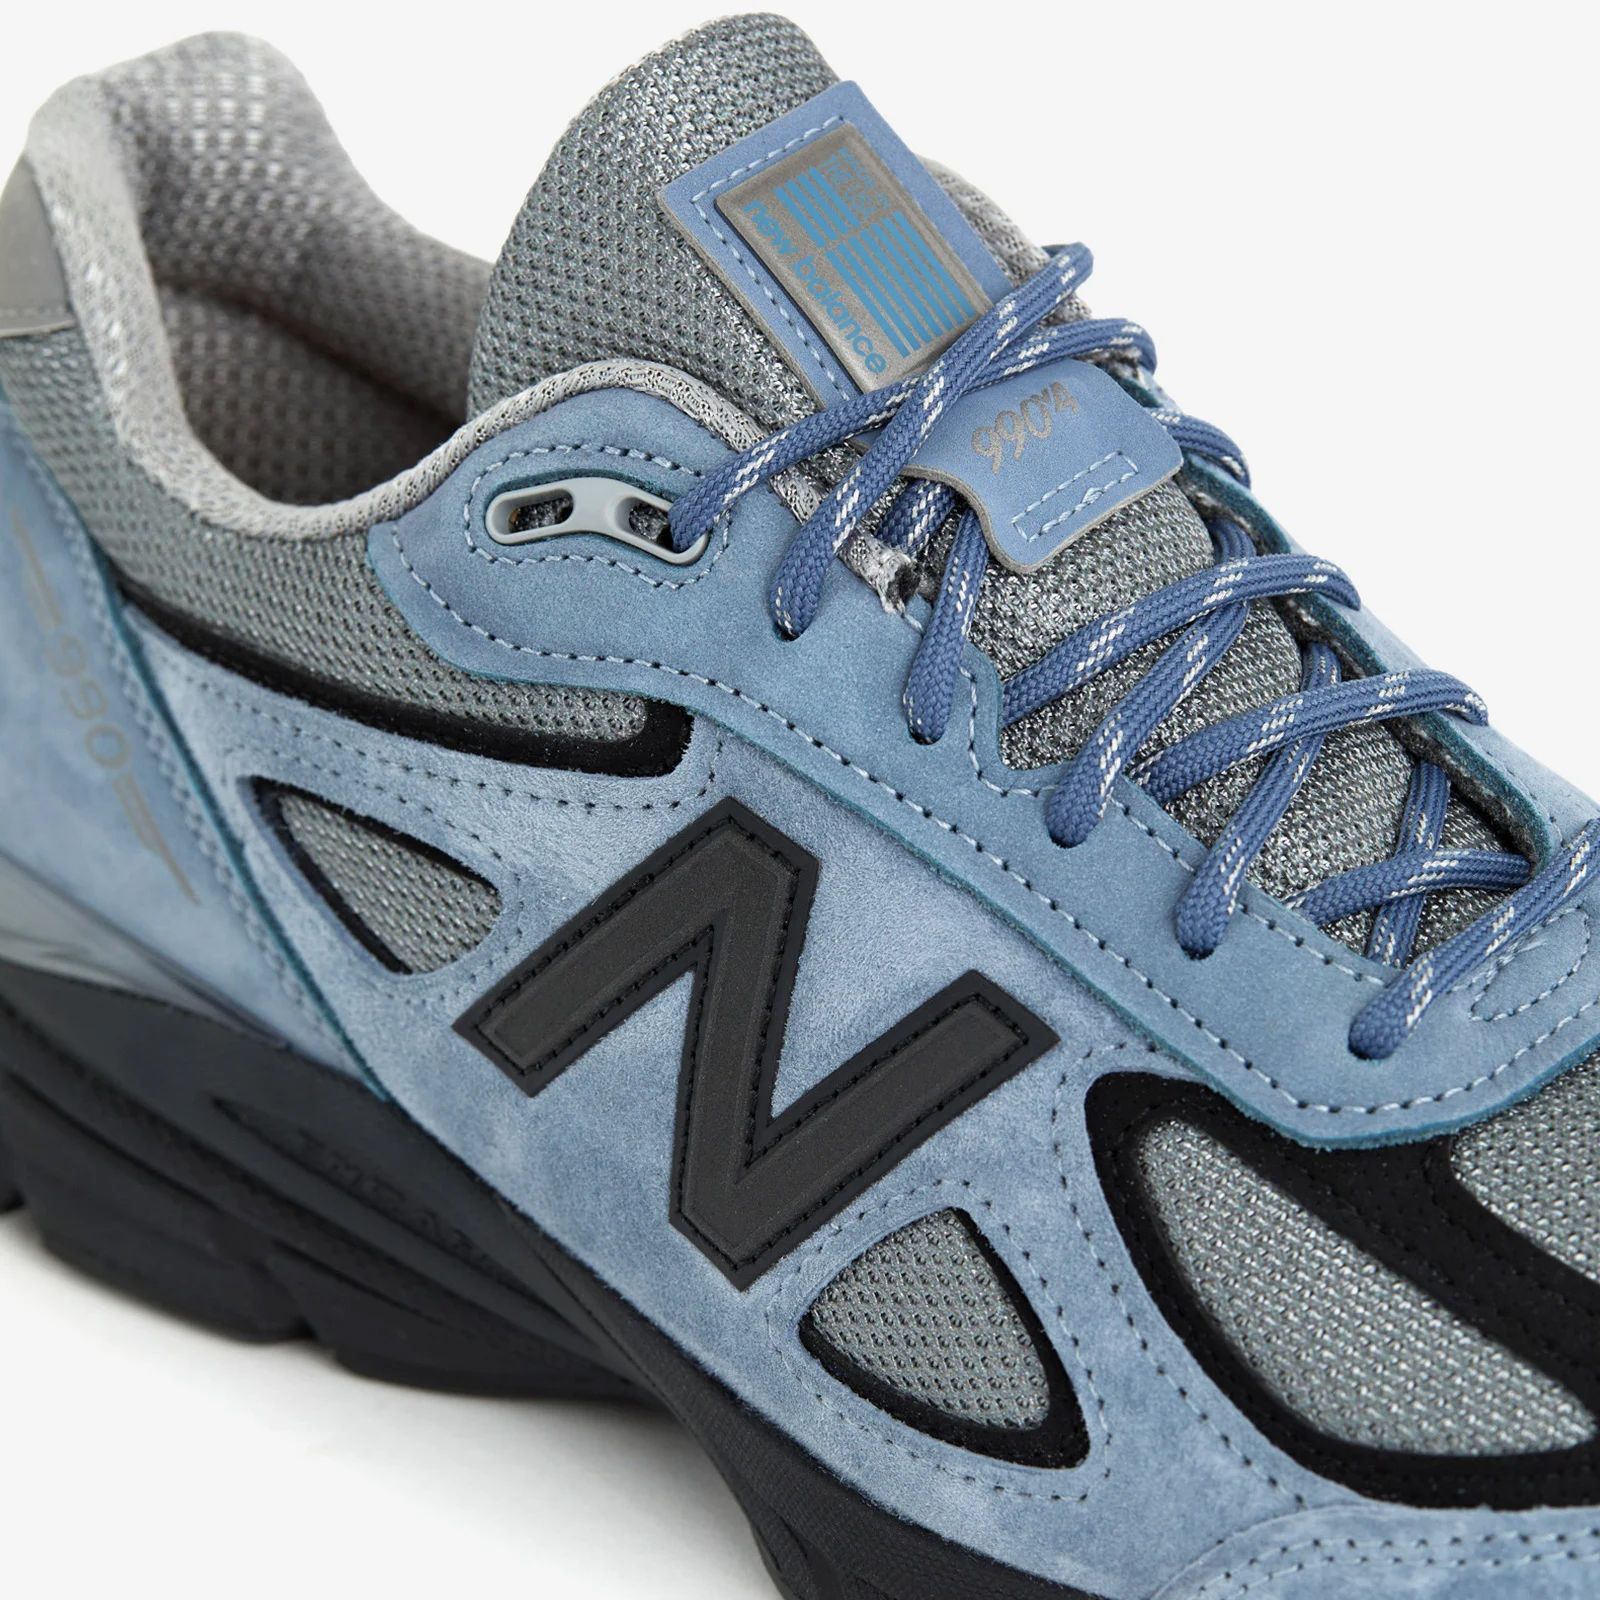 The New Balance 990v4 Arctic Grey Releases March 28 | House of The°